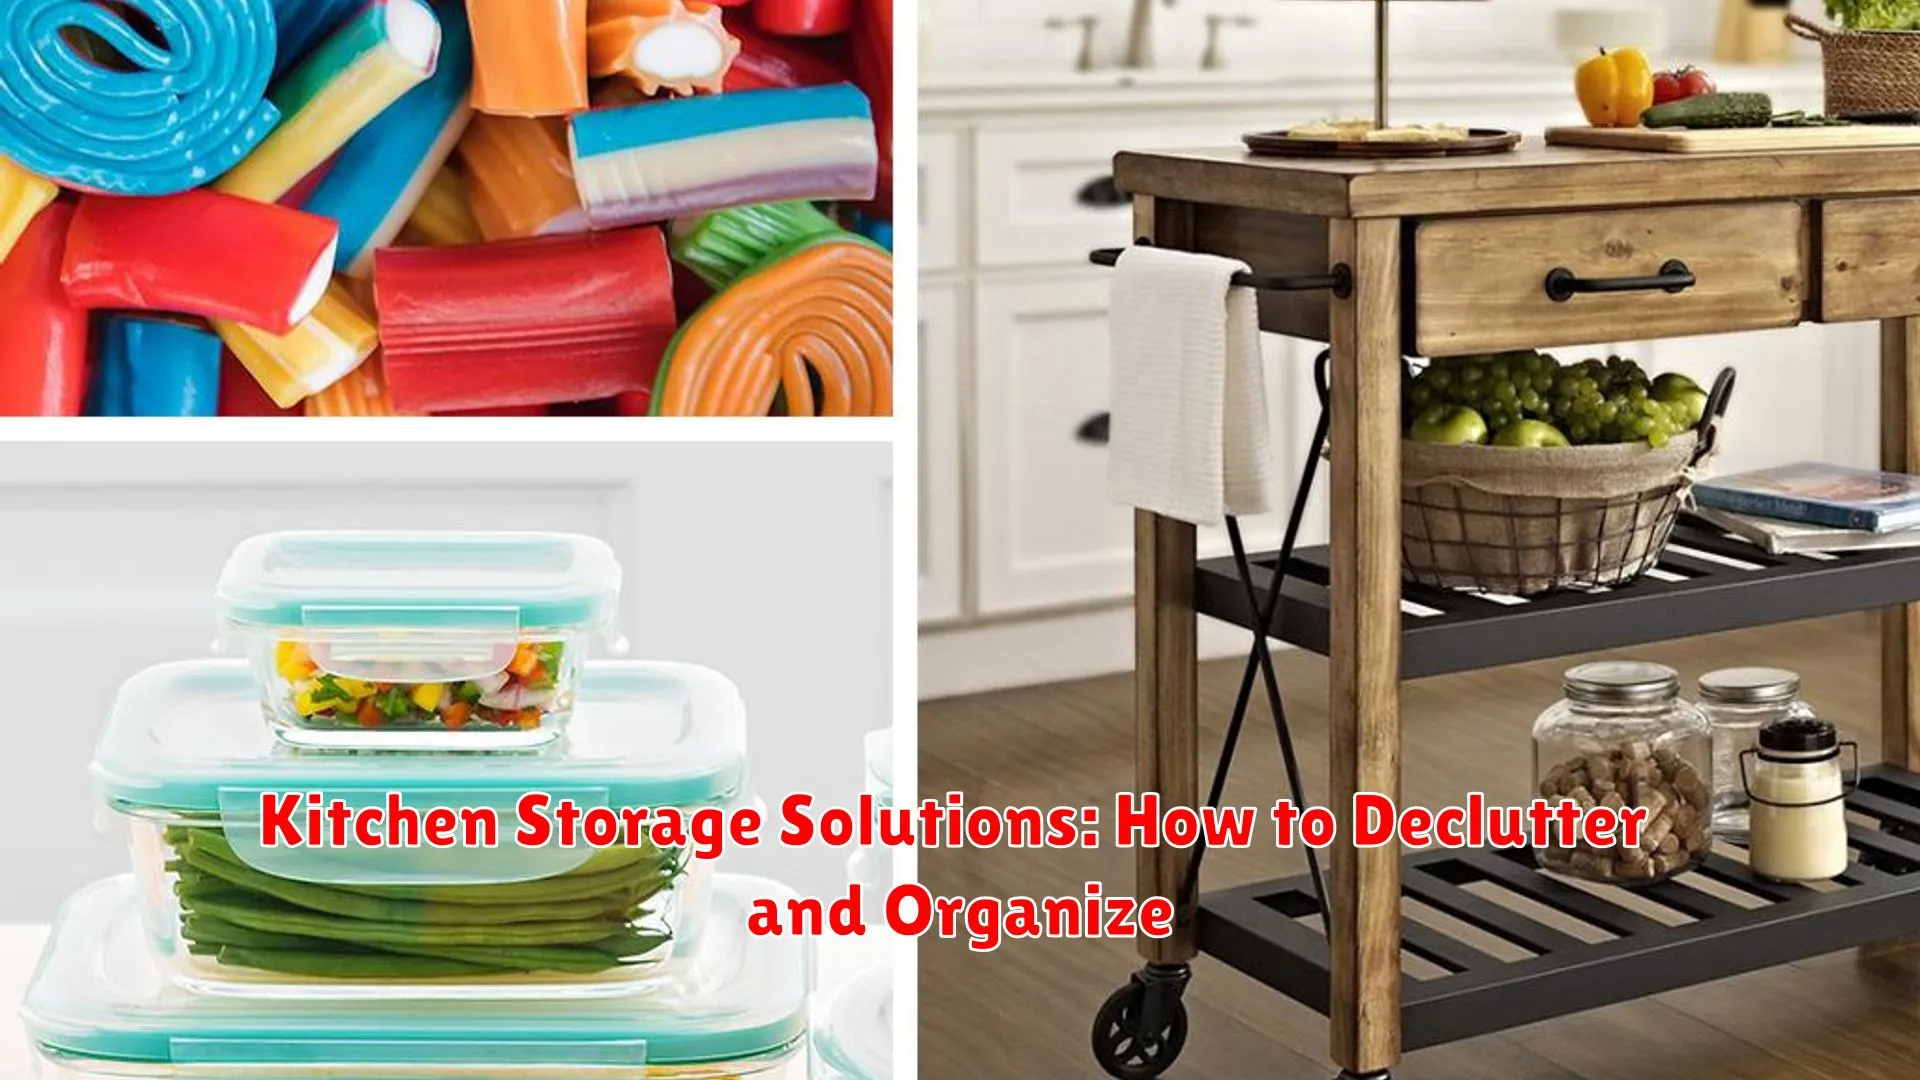 Kitchen Storage Solutions: How to Declutter and Organize